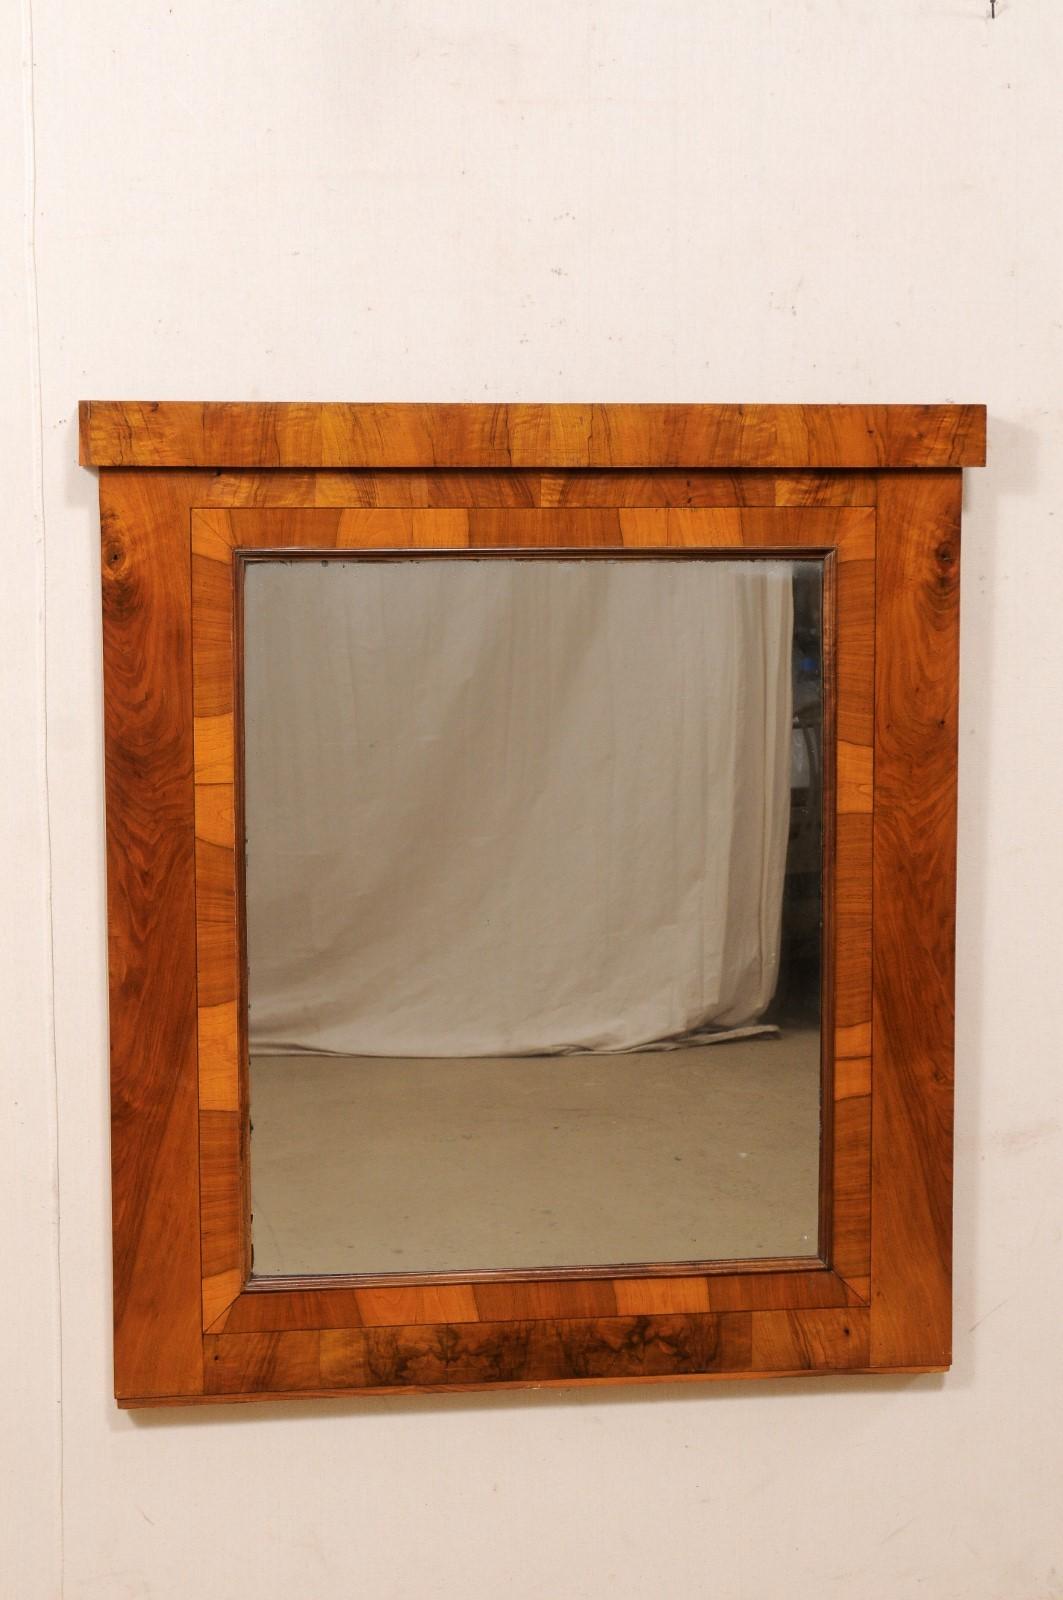 An Austrian Biedermeier style mirror from the 19th century. This antique mirror from Austria features it's original glass mirror and walnut veneer surround. The design is simple and clean, with a straight crest rail along the top. This piece is in